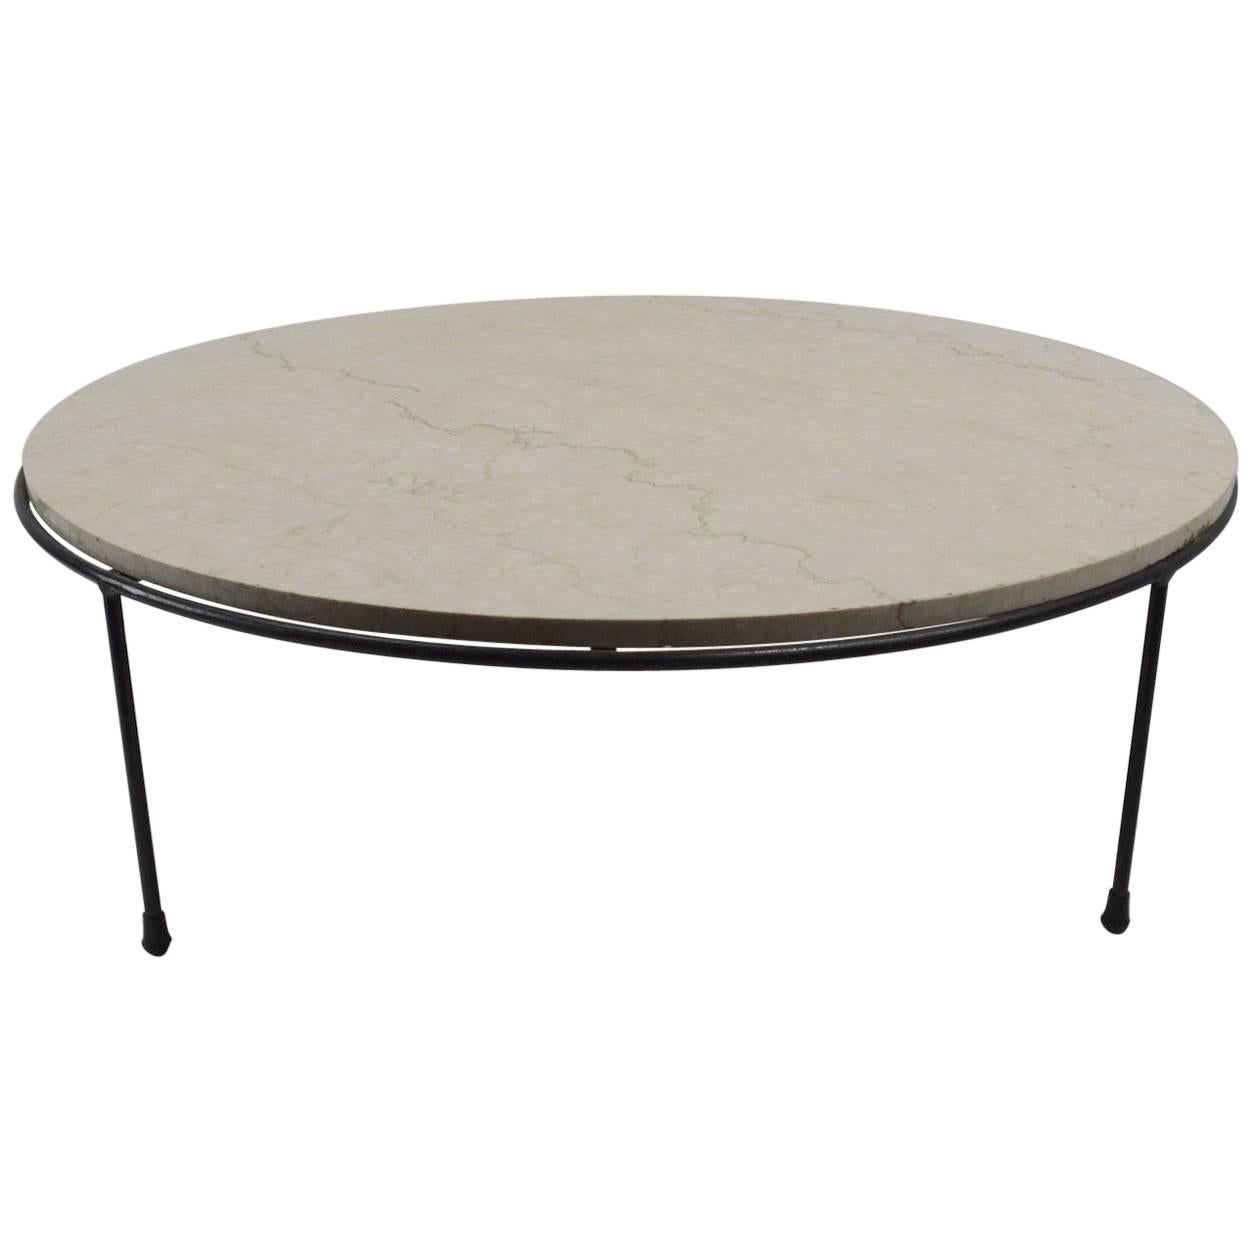 Round Iron and Marble-Top Coffee Table by McCobb